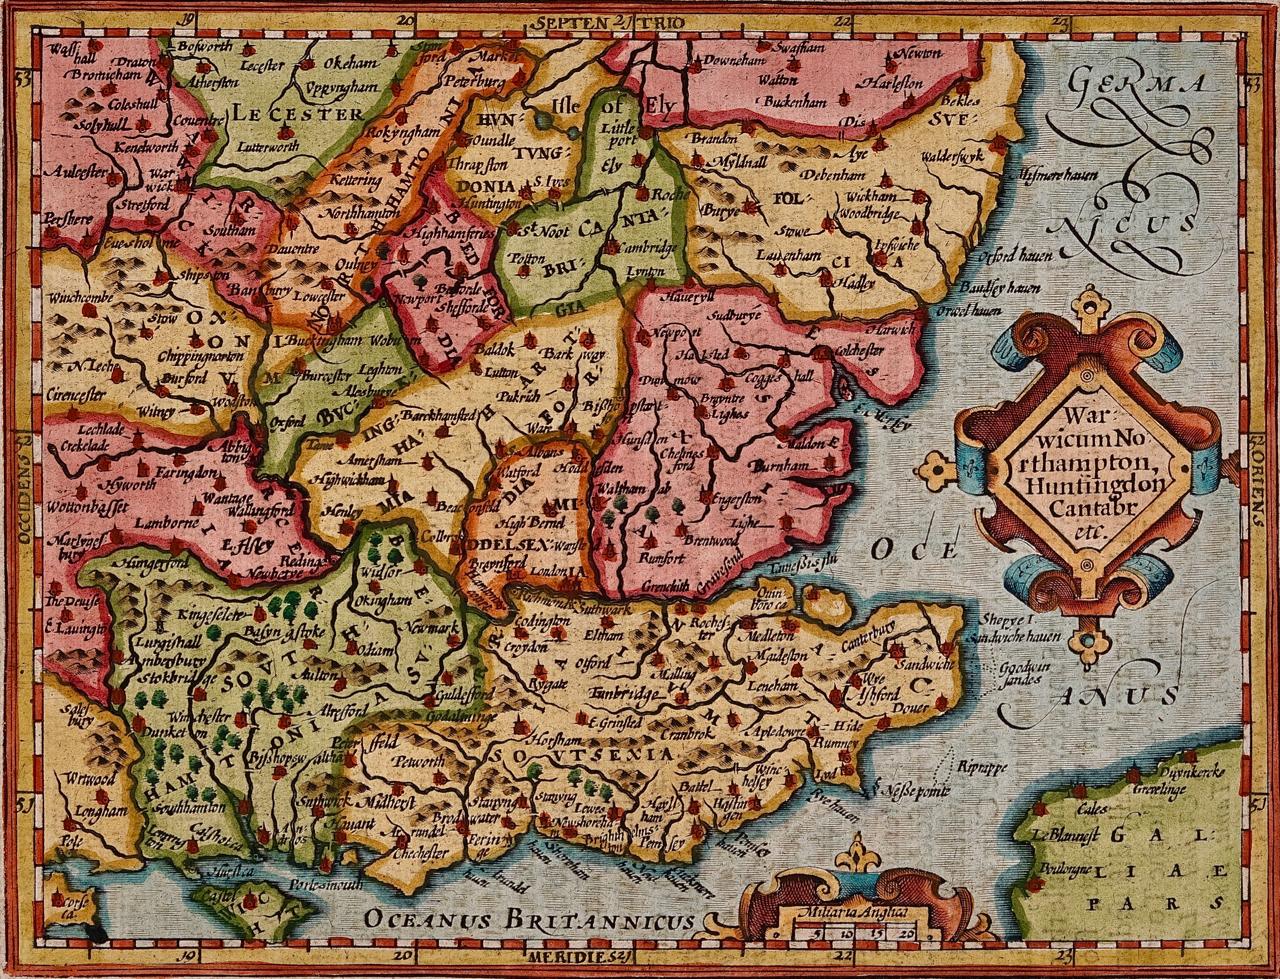 Gerard Mercator Print - Southeastern England: A 17th Century Hand-Colored Map by Mercator and Hondius